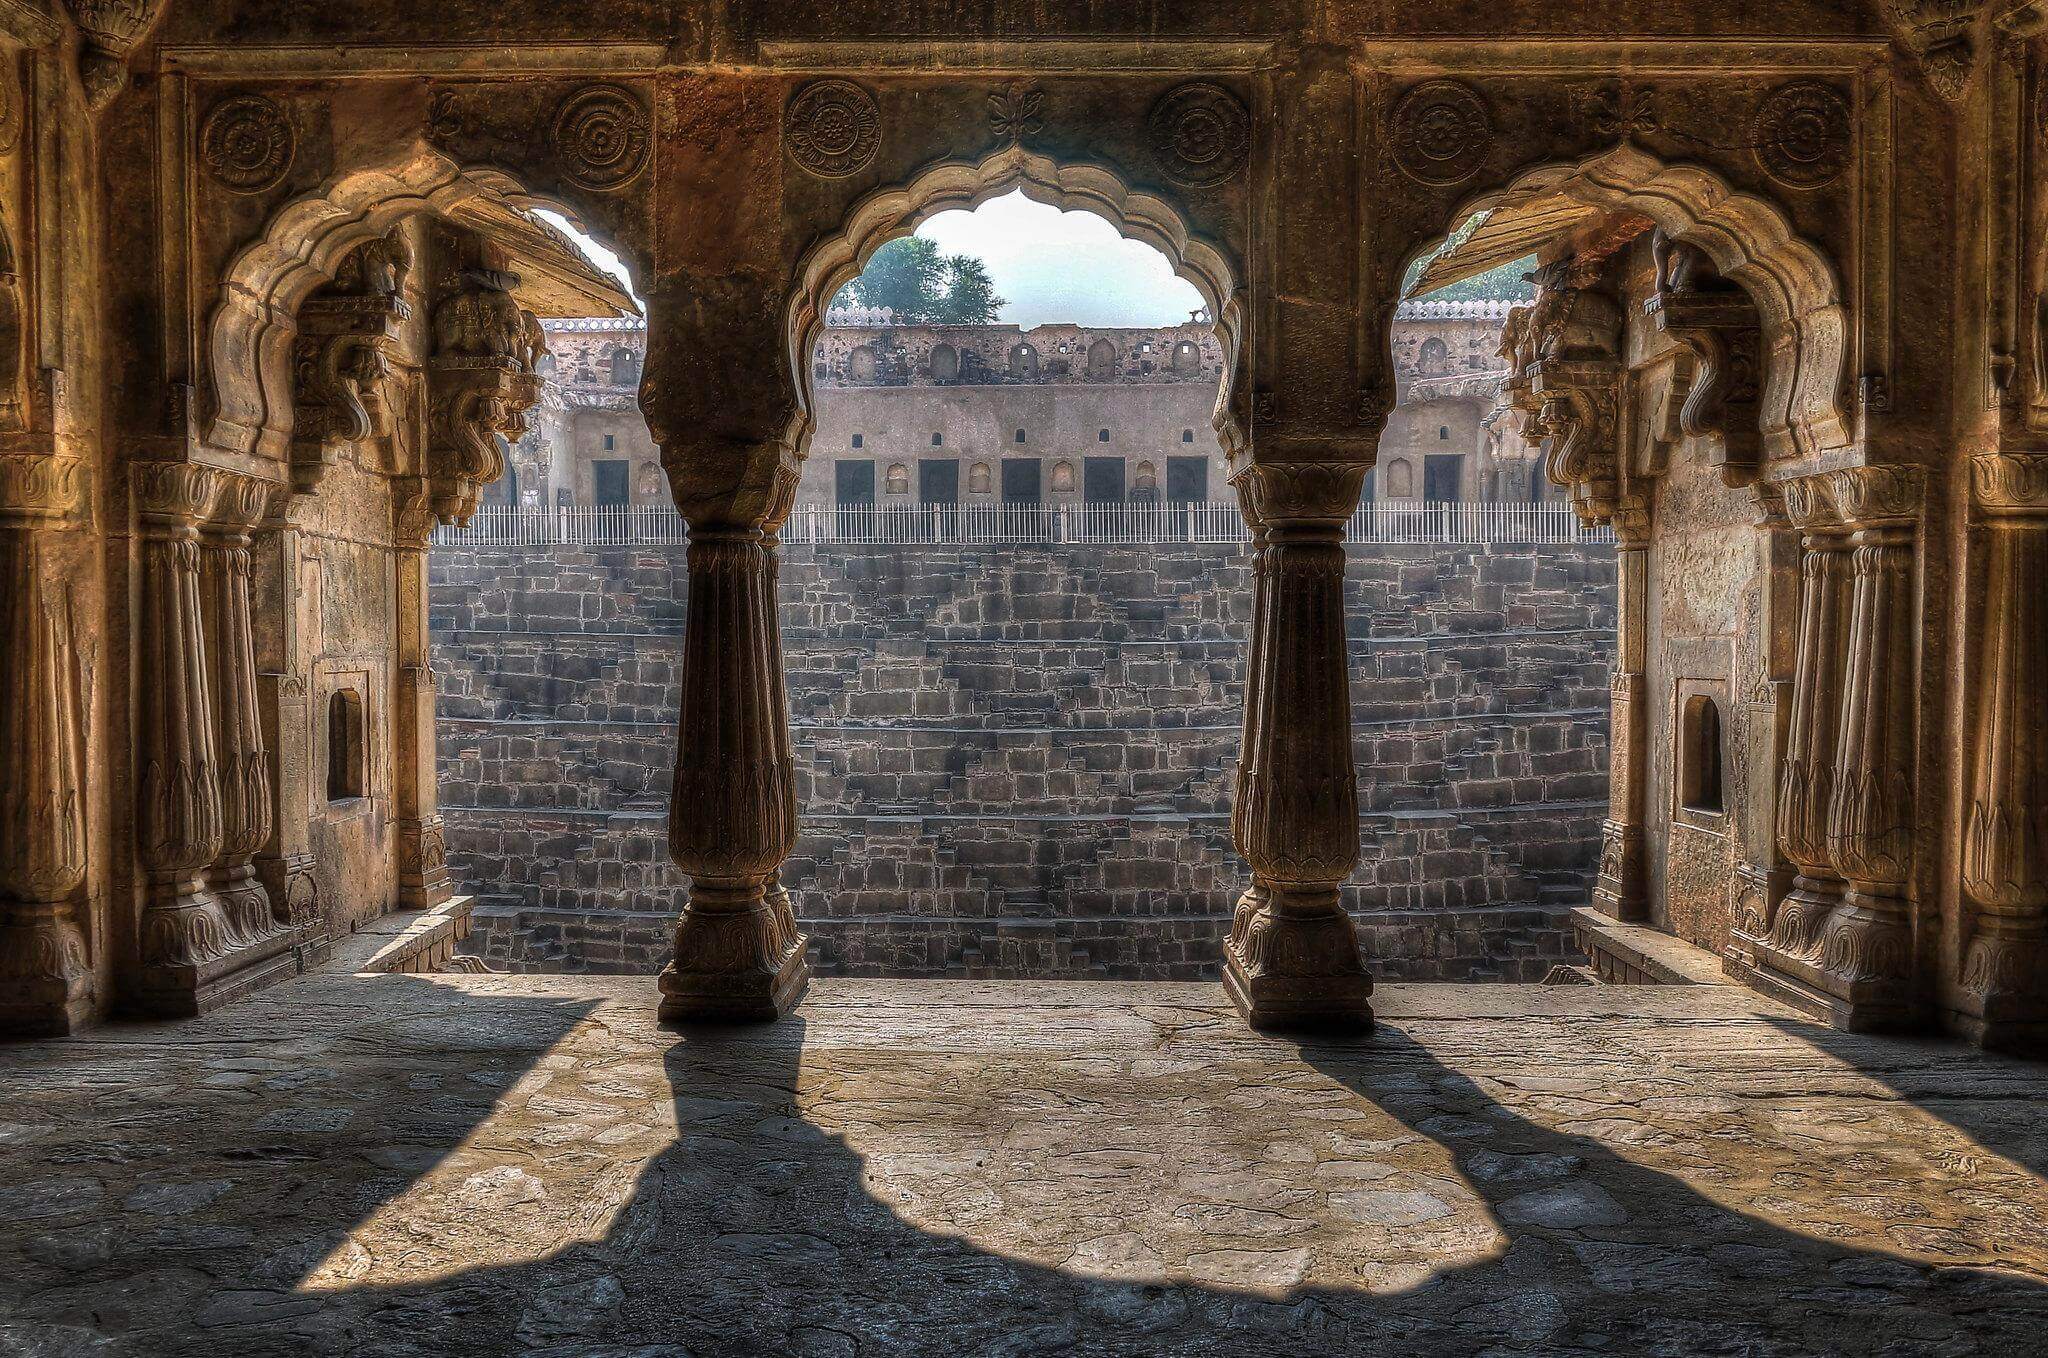 Chand Baori in Rajasthan The Inspiration behind JTL’s Handcrafted Baori Collection